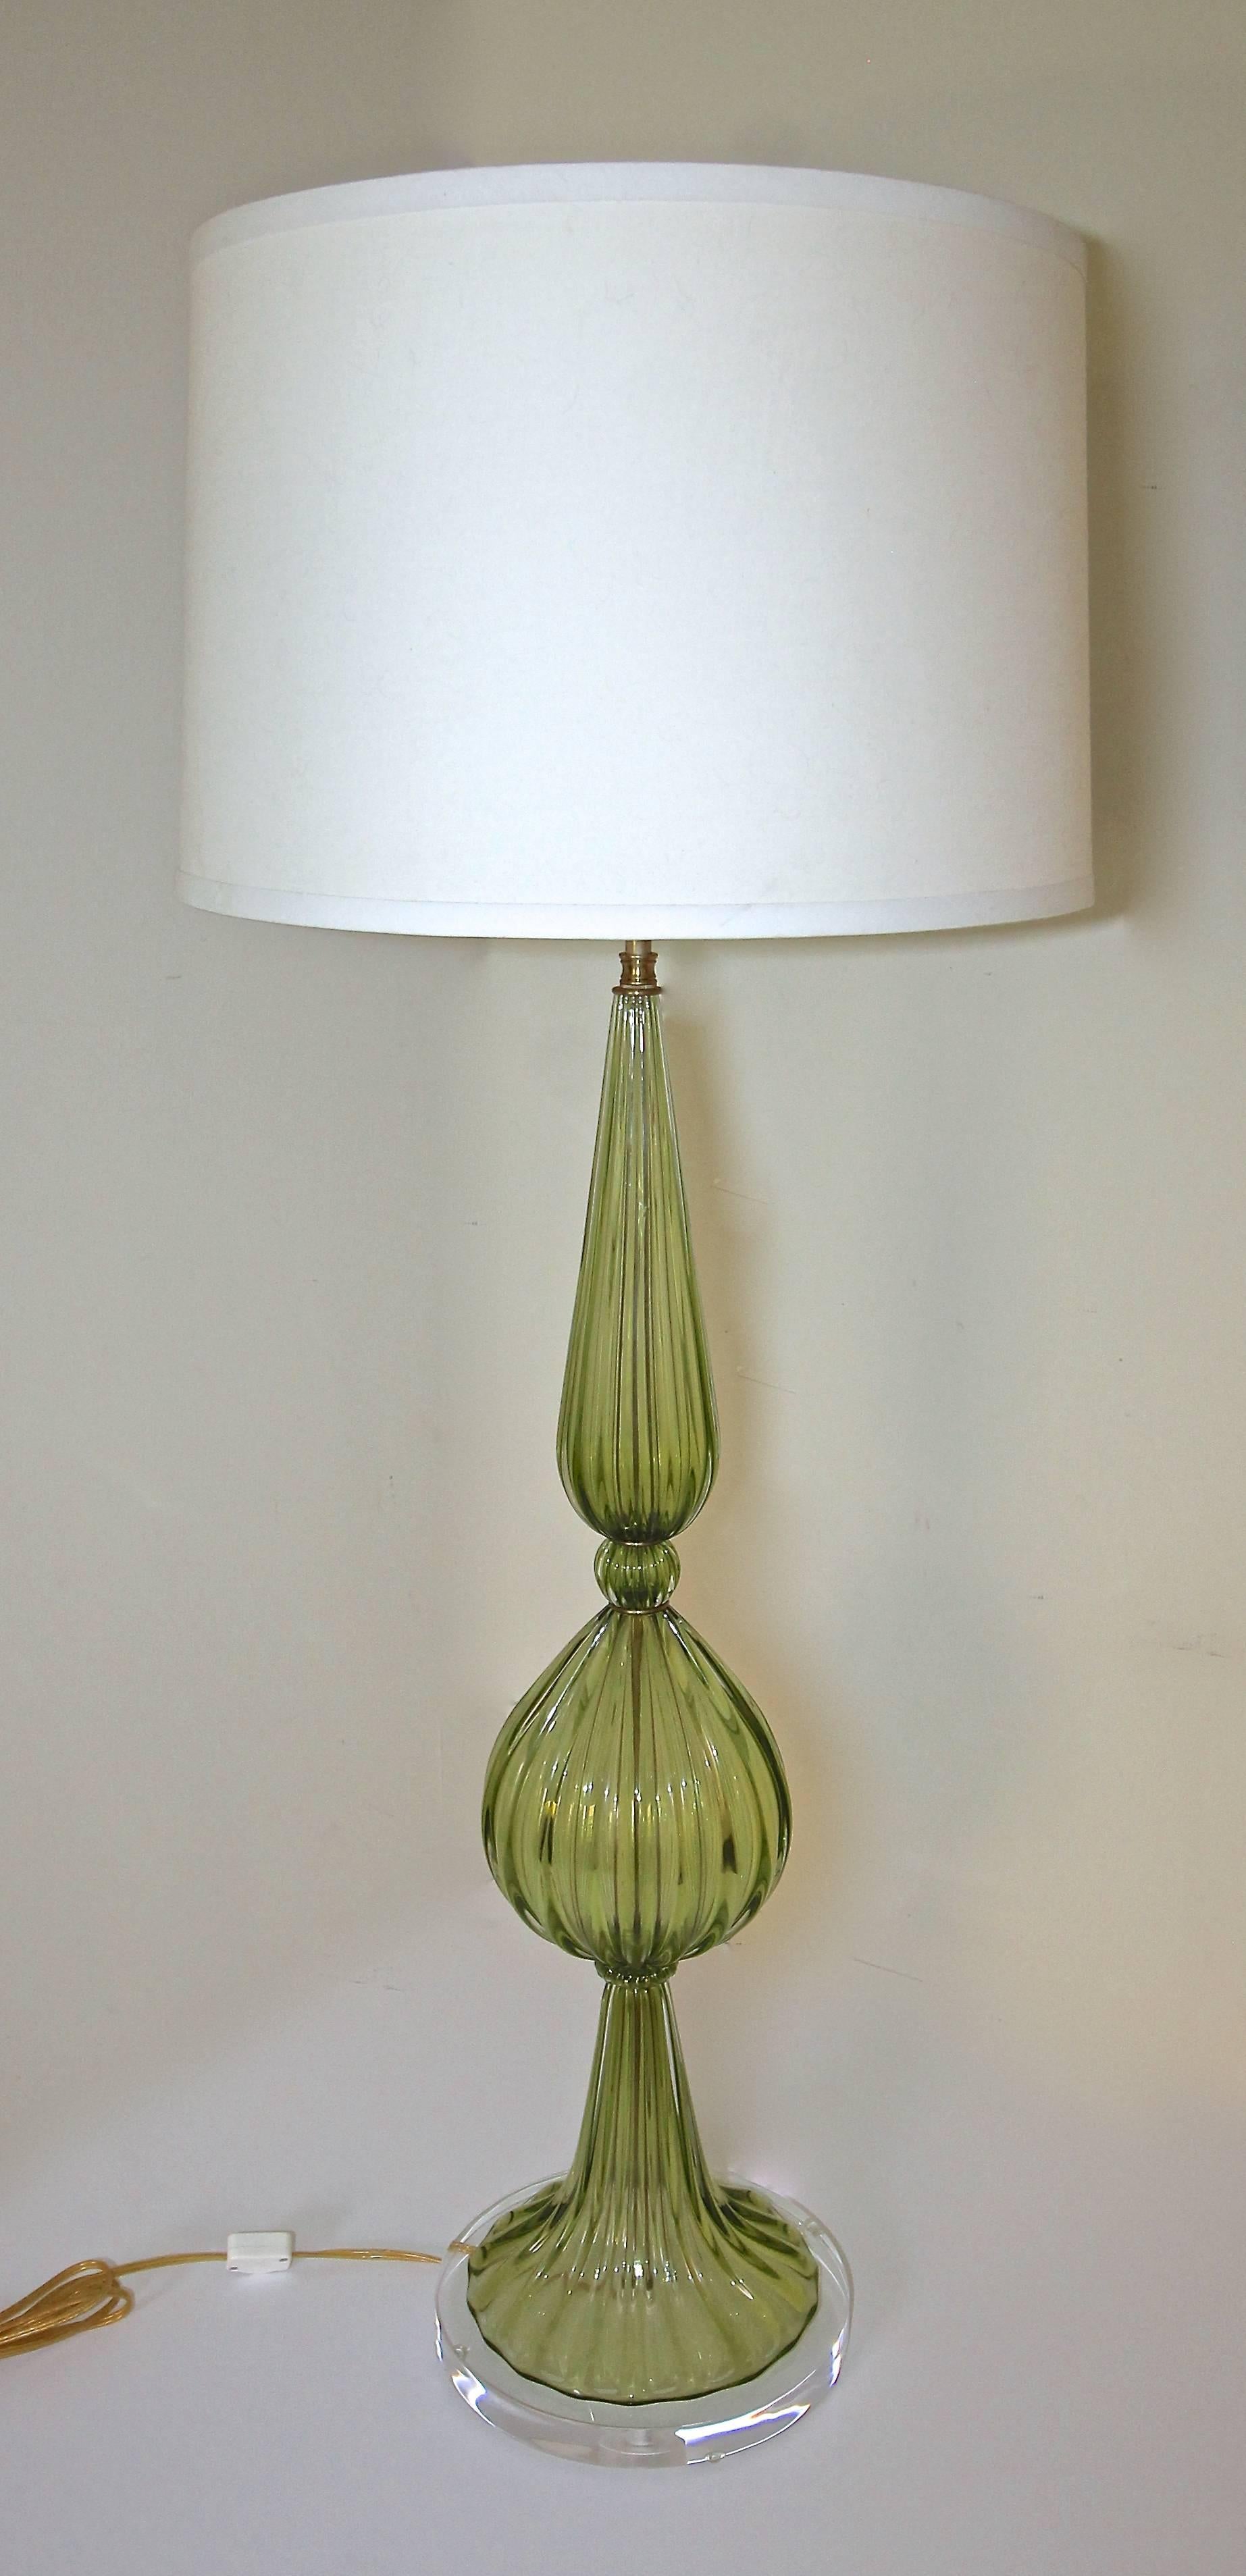 Monumental absinthe green Murano handblown glass table lamp by Barbini. New custom acrylic base with new double brass cluster and hi/low dimmer. Newly wired for US.

Measure: To top of glass 30" over all height 42".